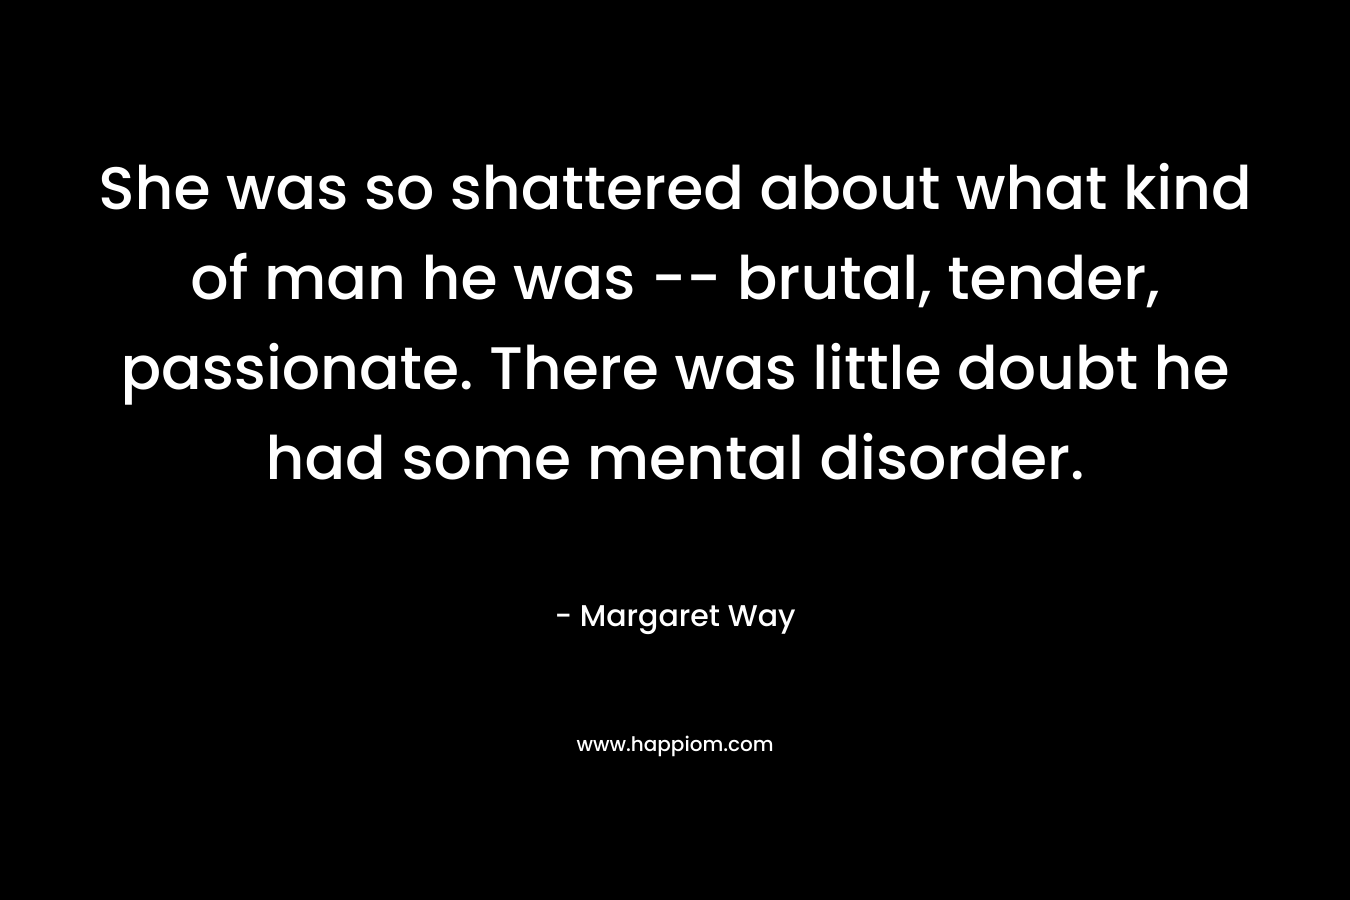 She was so shattered about what kind of man he was -- brutal, tender, passionate. There was little doubt he had some mental disorder.